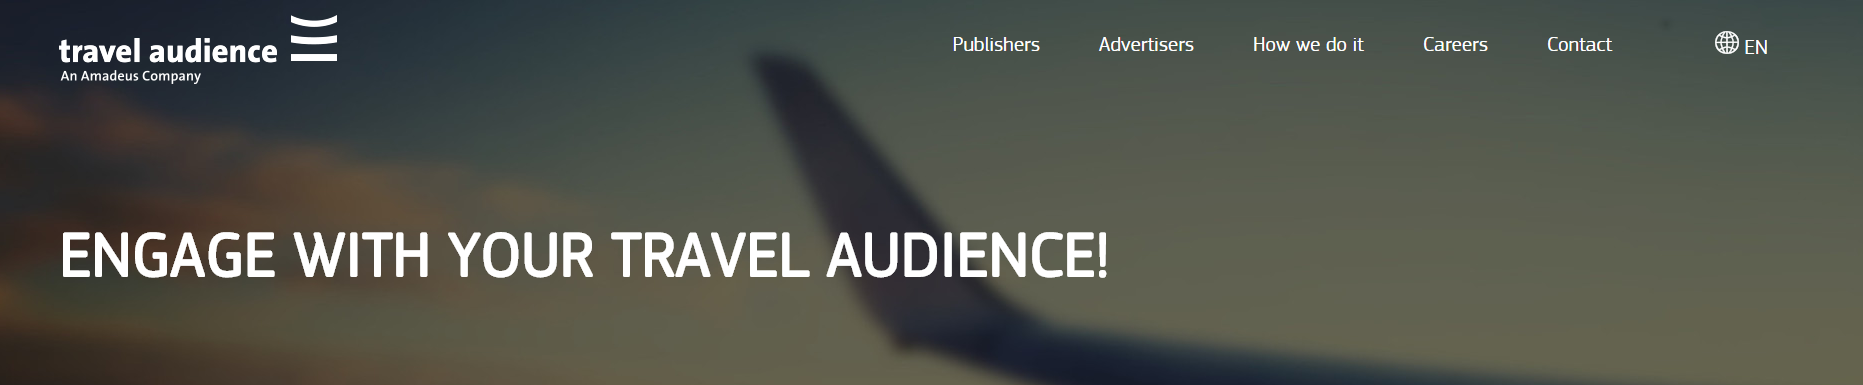 Travel Audience GmbH cover